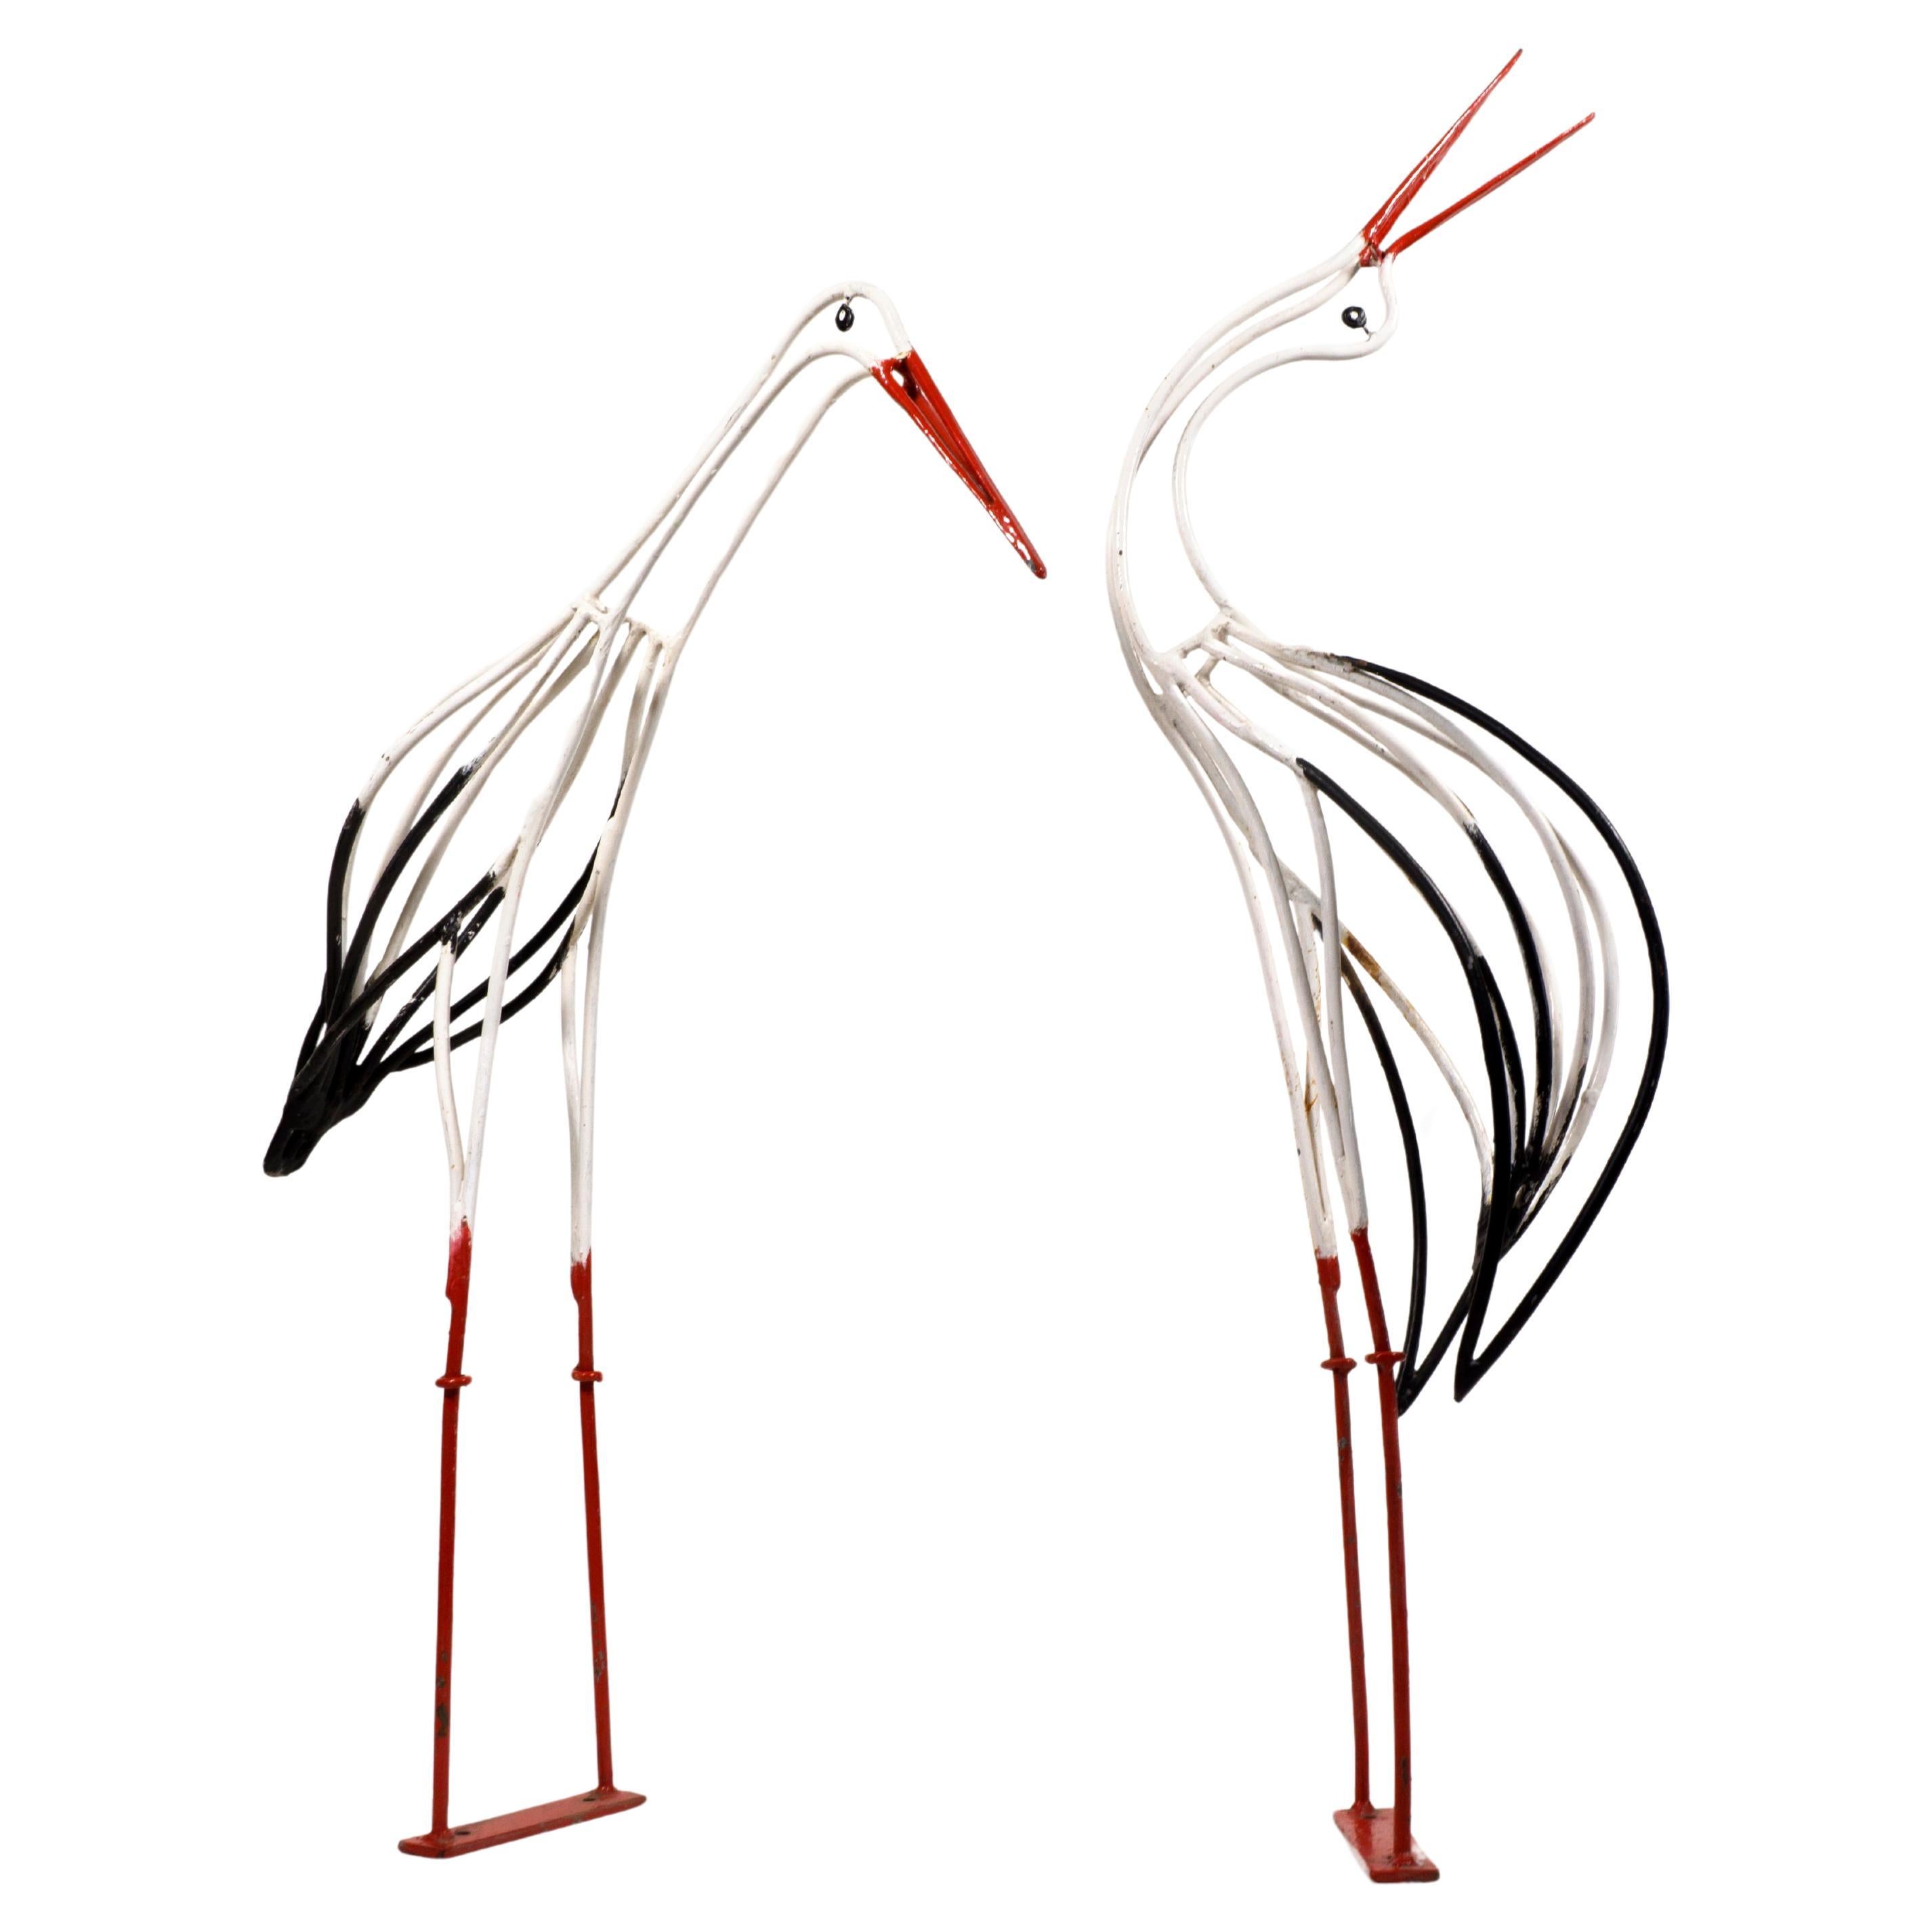 Lovely Midcentury Life-size Pair of 1950s Wrought Iron Stork Sculptures